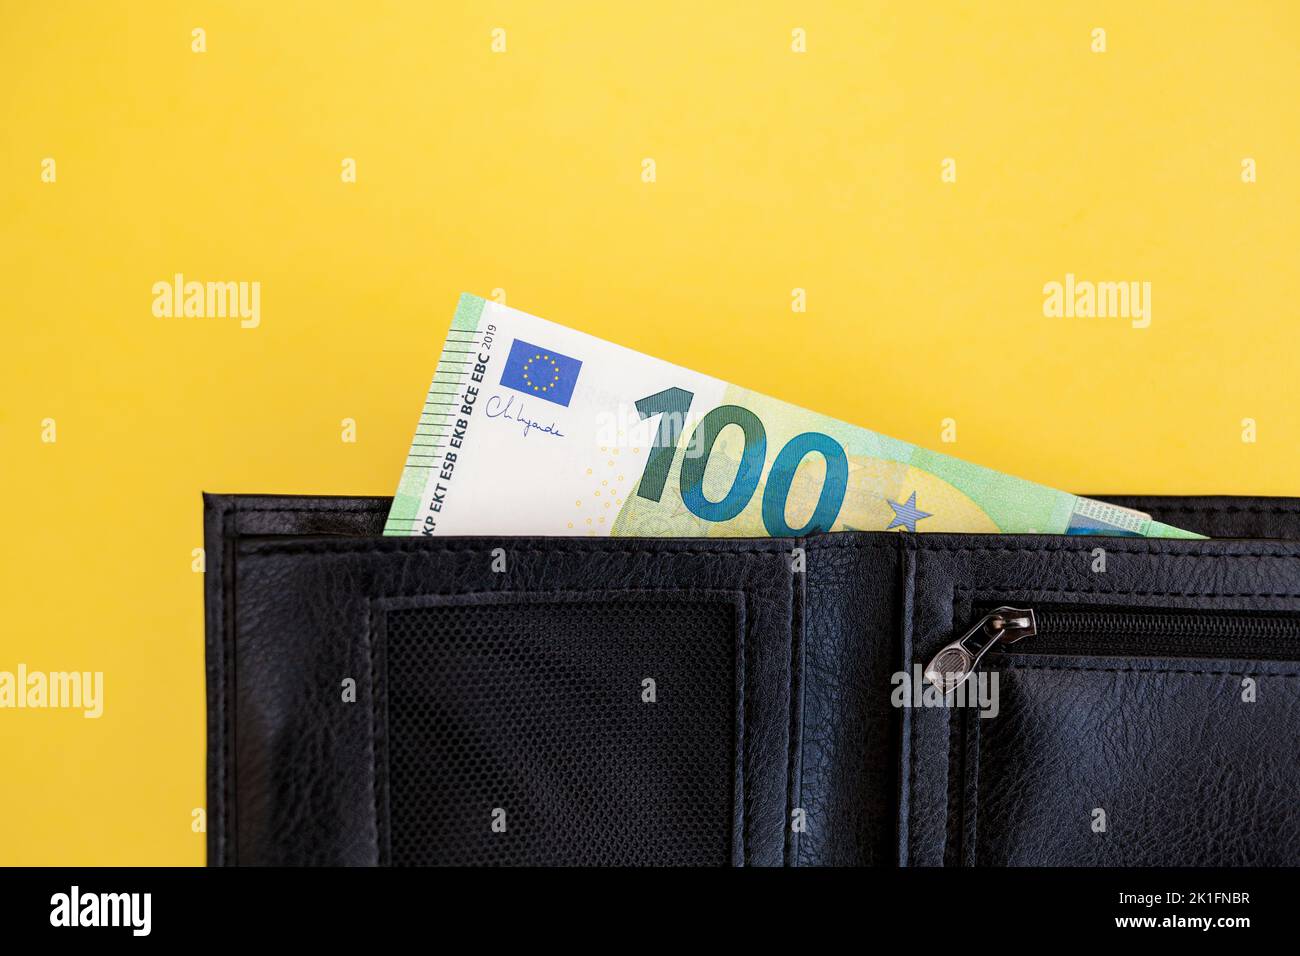 100 euro banknote sticks out of a black wallet on a yellow background Stock Photo